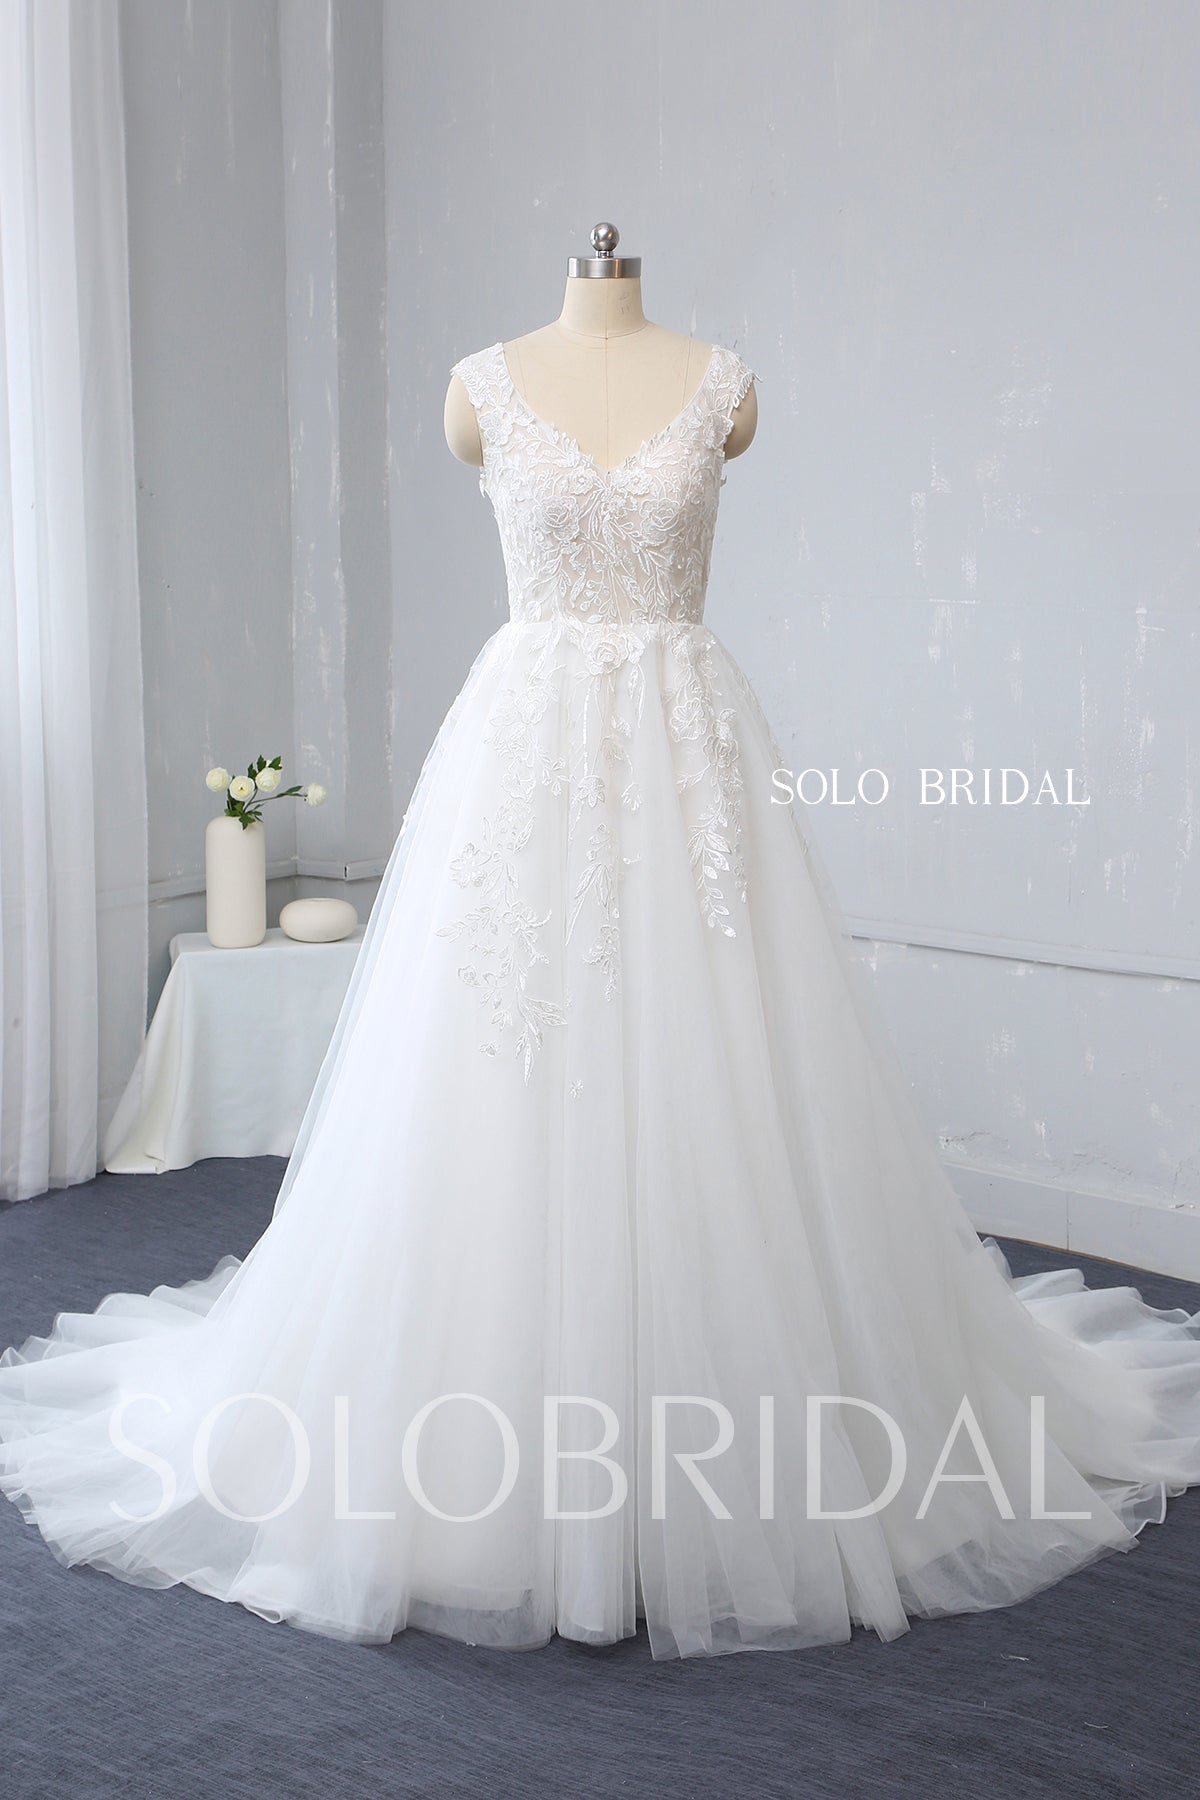 Ivory Tulle Wedding Dress with Cotton Lace